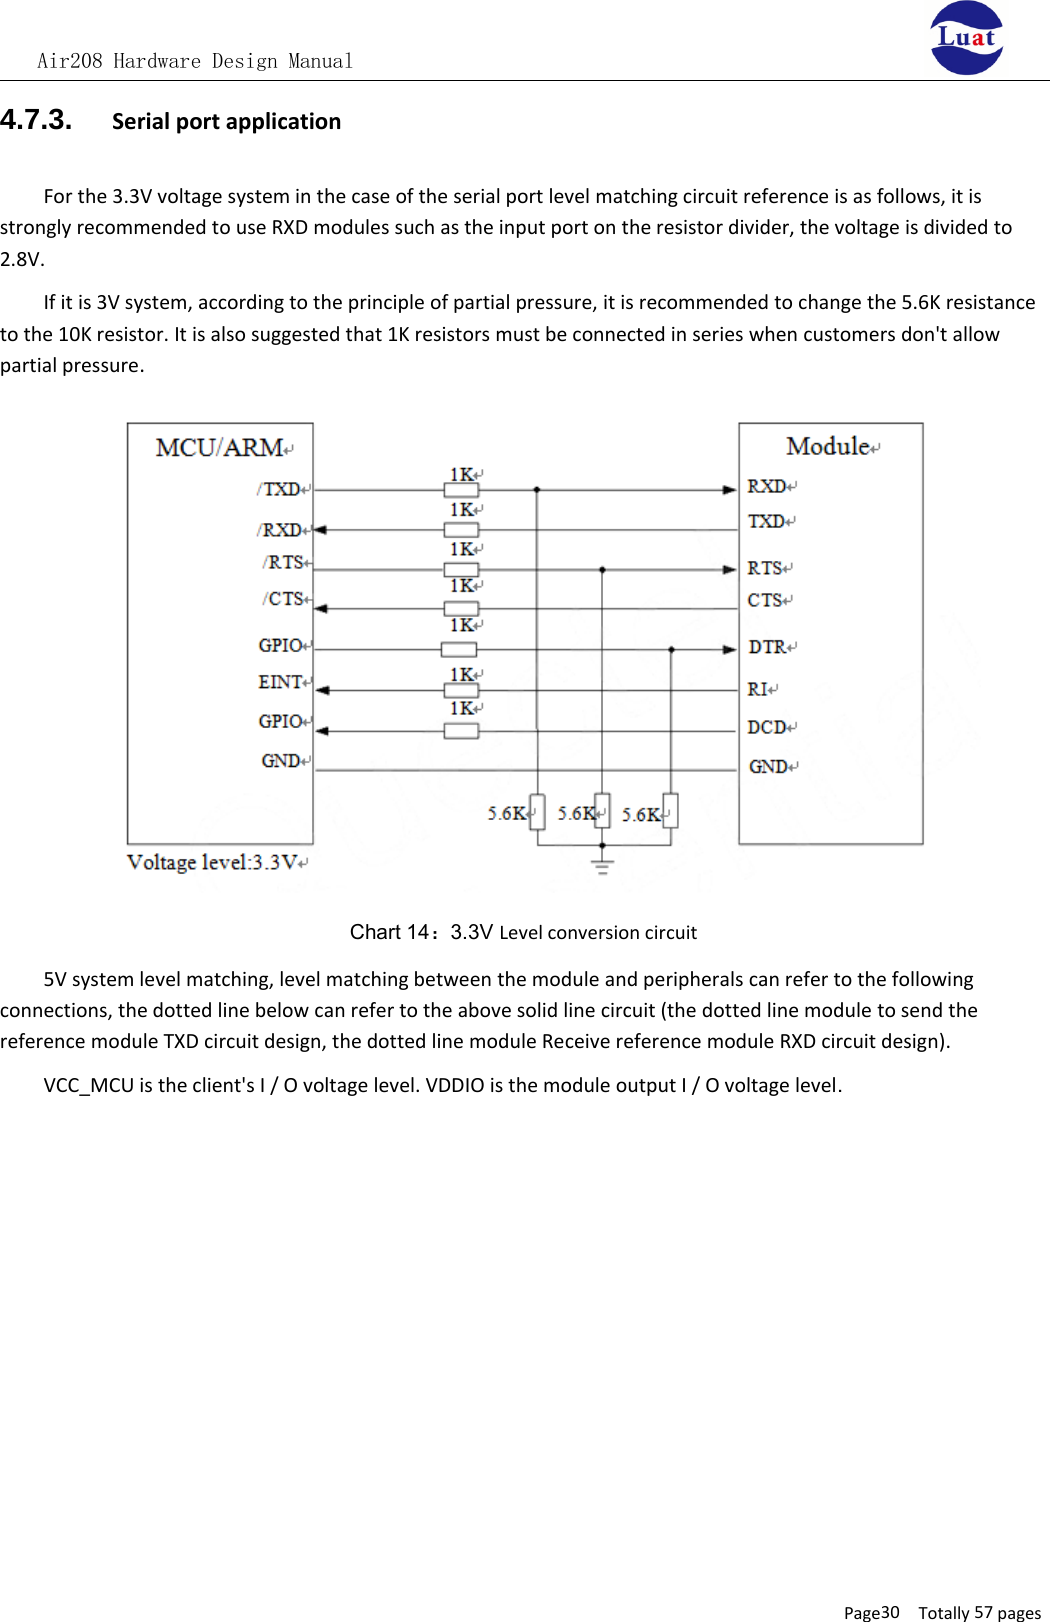 Air208 Hardware Design ManualPage30 Totally 57 pages4.7.3. Serial port applicationFor the 3.3V voltage system in the case of the serial port level matching circuit reference is as follows, it isstrongly recommended to use RXD modules such as the input port on the resistor divider, the voltage is divided to2.8V.If it is 3V system, according to the principle of partial pressure, it is recommended to change the 5.6K resistanceto the 10K resistor. It is also suggested that 1K resistors must be connected in series when customers don&apos;t allowpartial pressure.Chart 14：3.3V Level conversion circuit5V system level matching, level matching between the module and peripherals can refer to the followingconnections, the dotted line below can refer to the above solid line circuit (the dotted line module to send thereference module TXD circuit design, the dotted line module Receive reference module RXD circuit design).VCC_MCU is the client&apos;s I / O voltage level. VDDIO is the module output I / O voltage level.